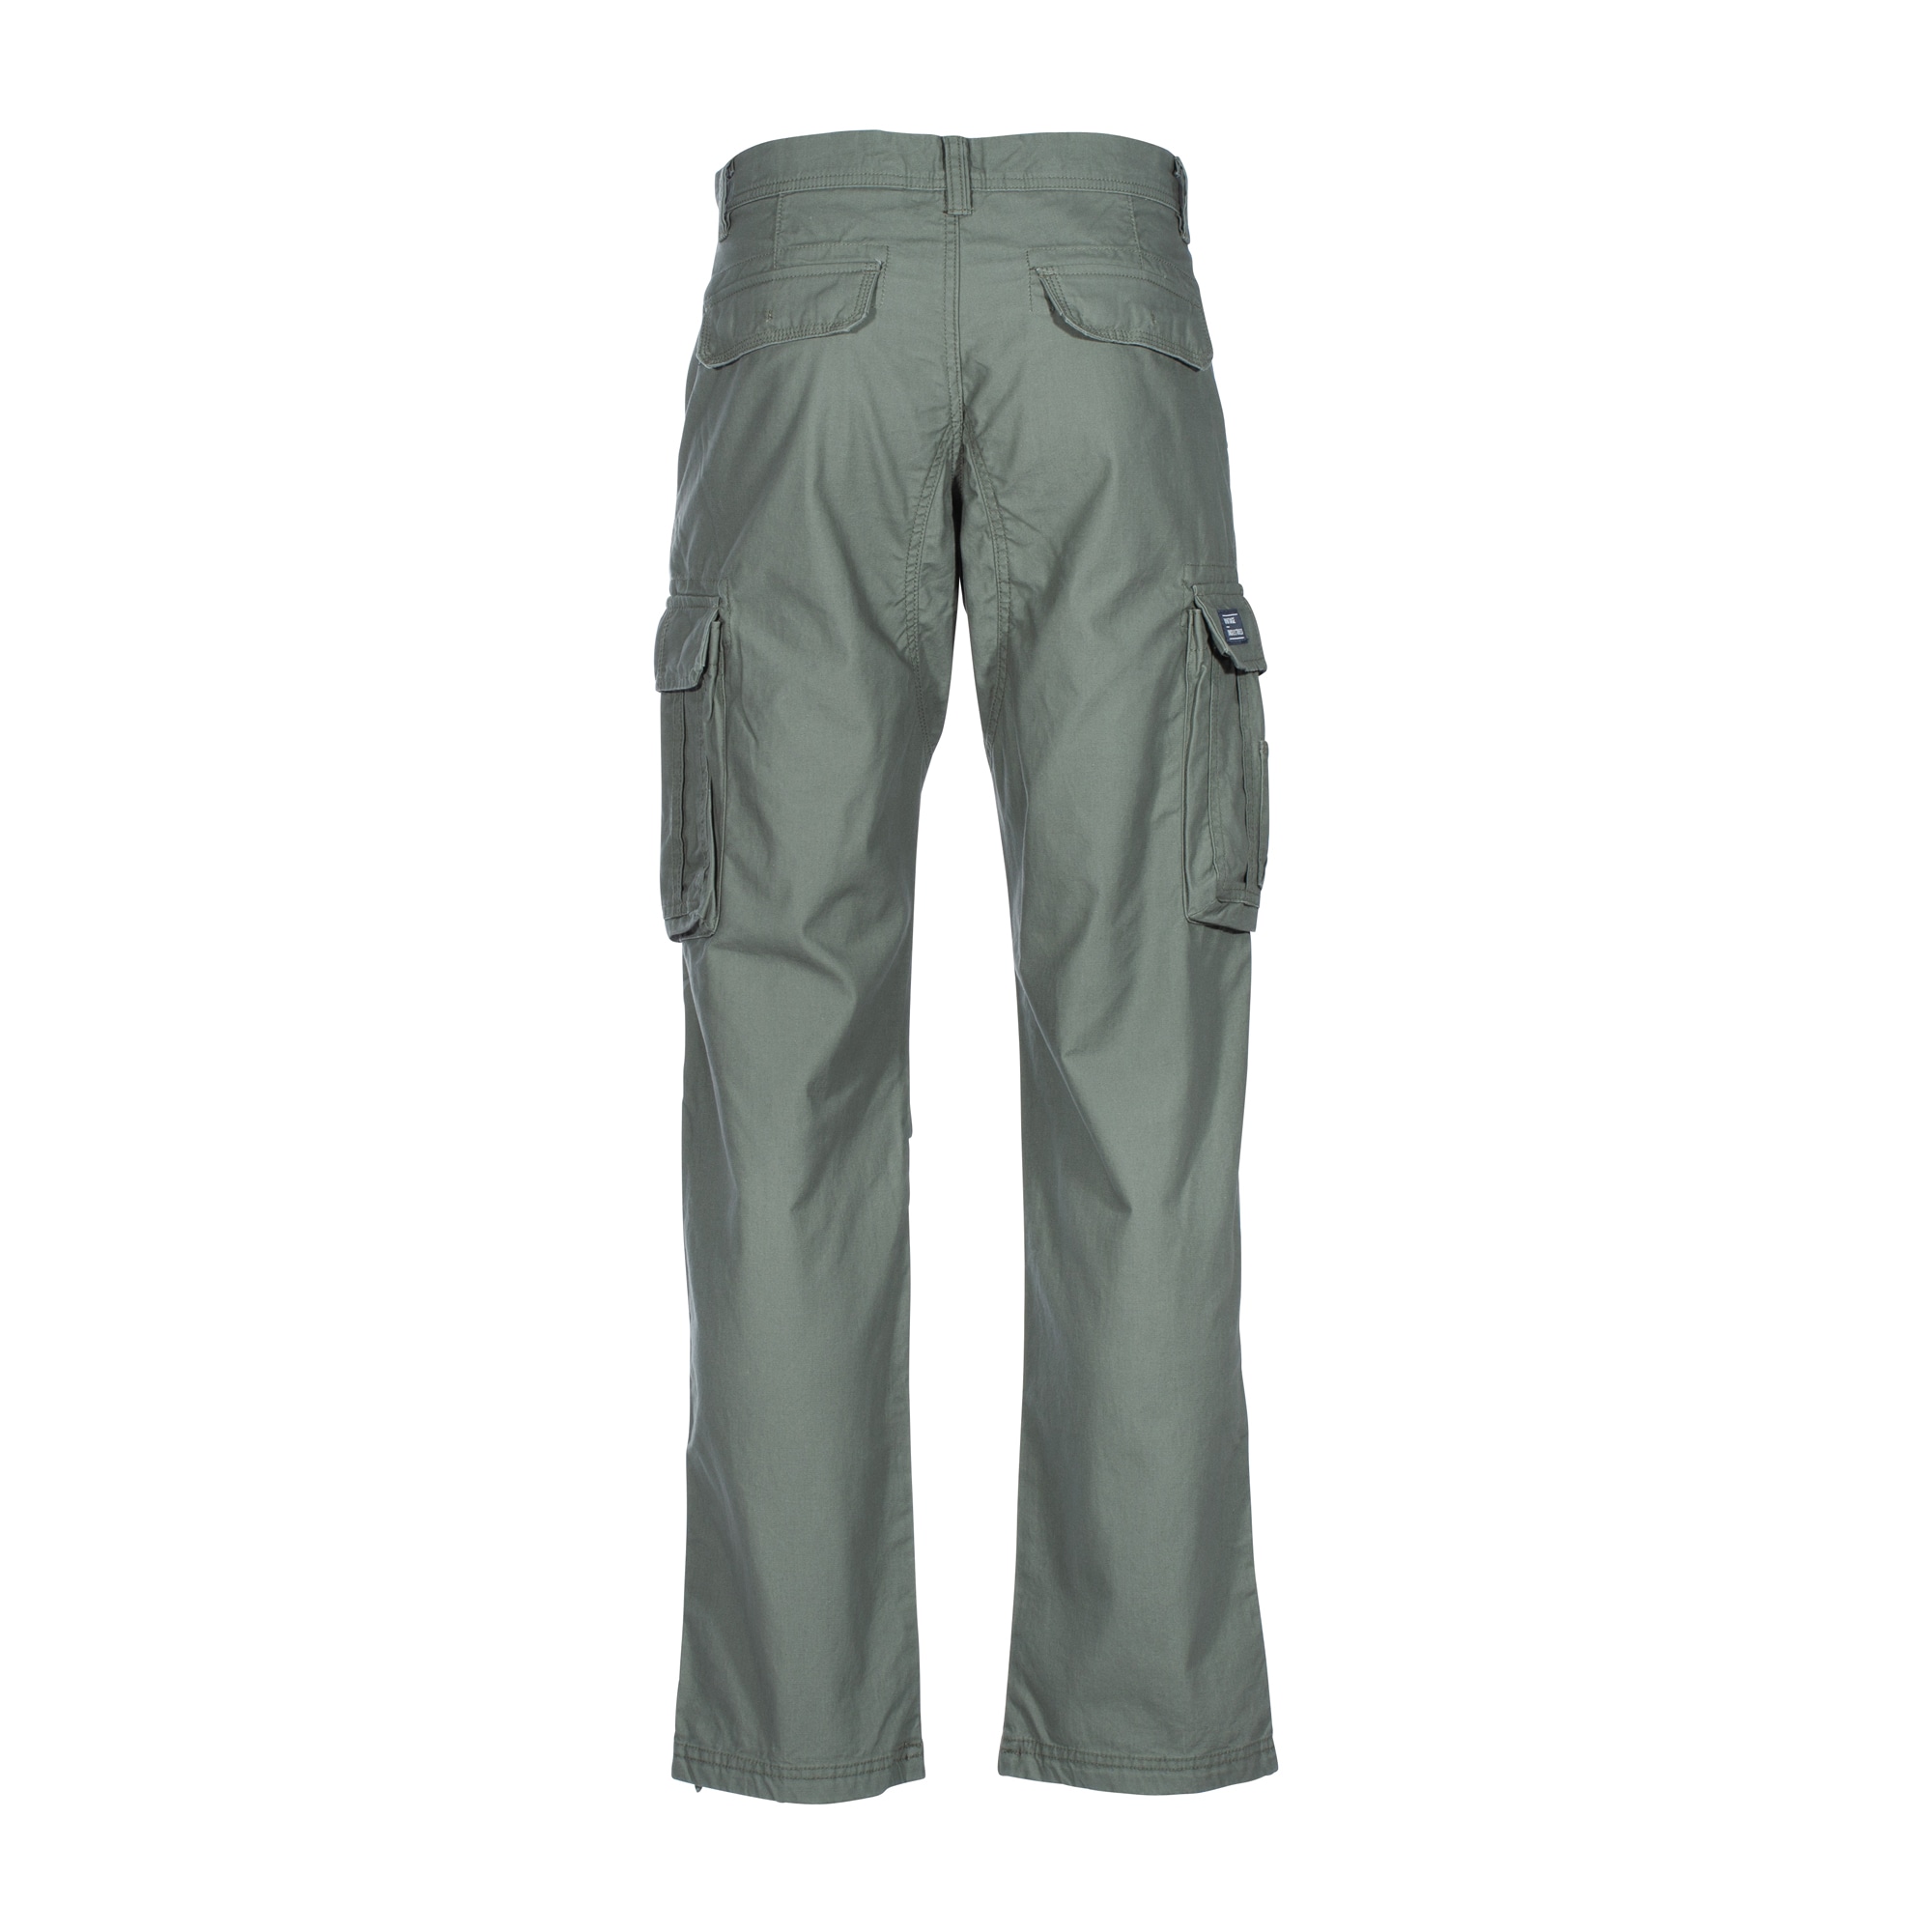 Purchase the Vintage Industries Reef Pants olive by ASMC